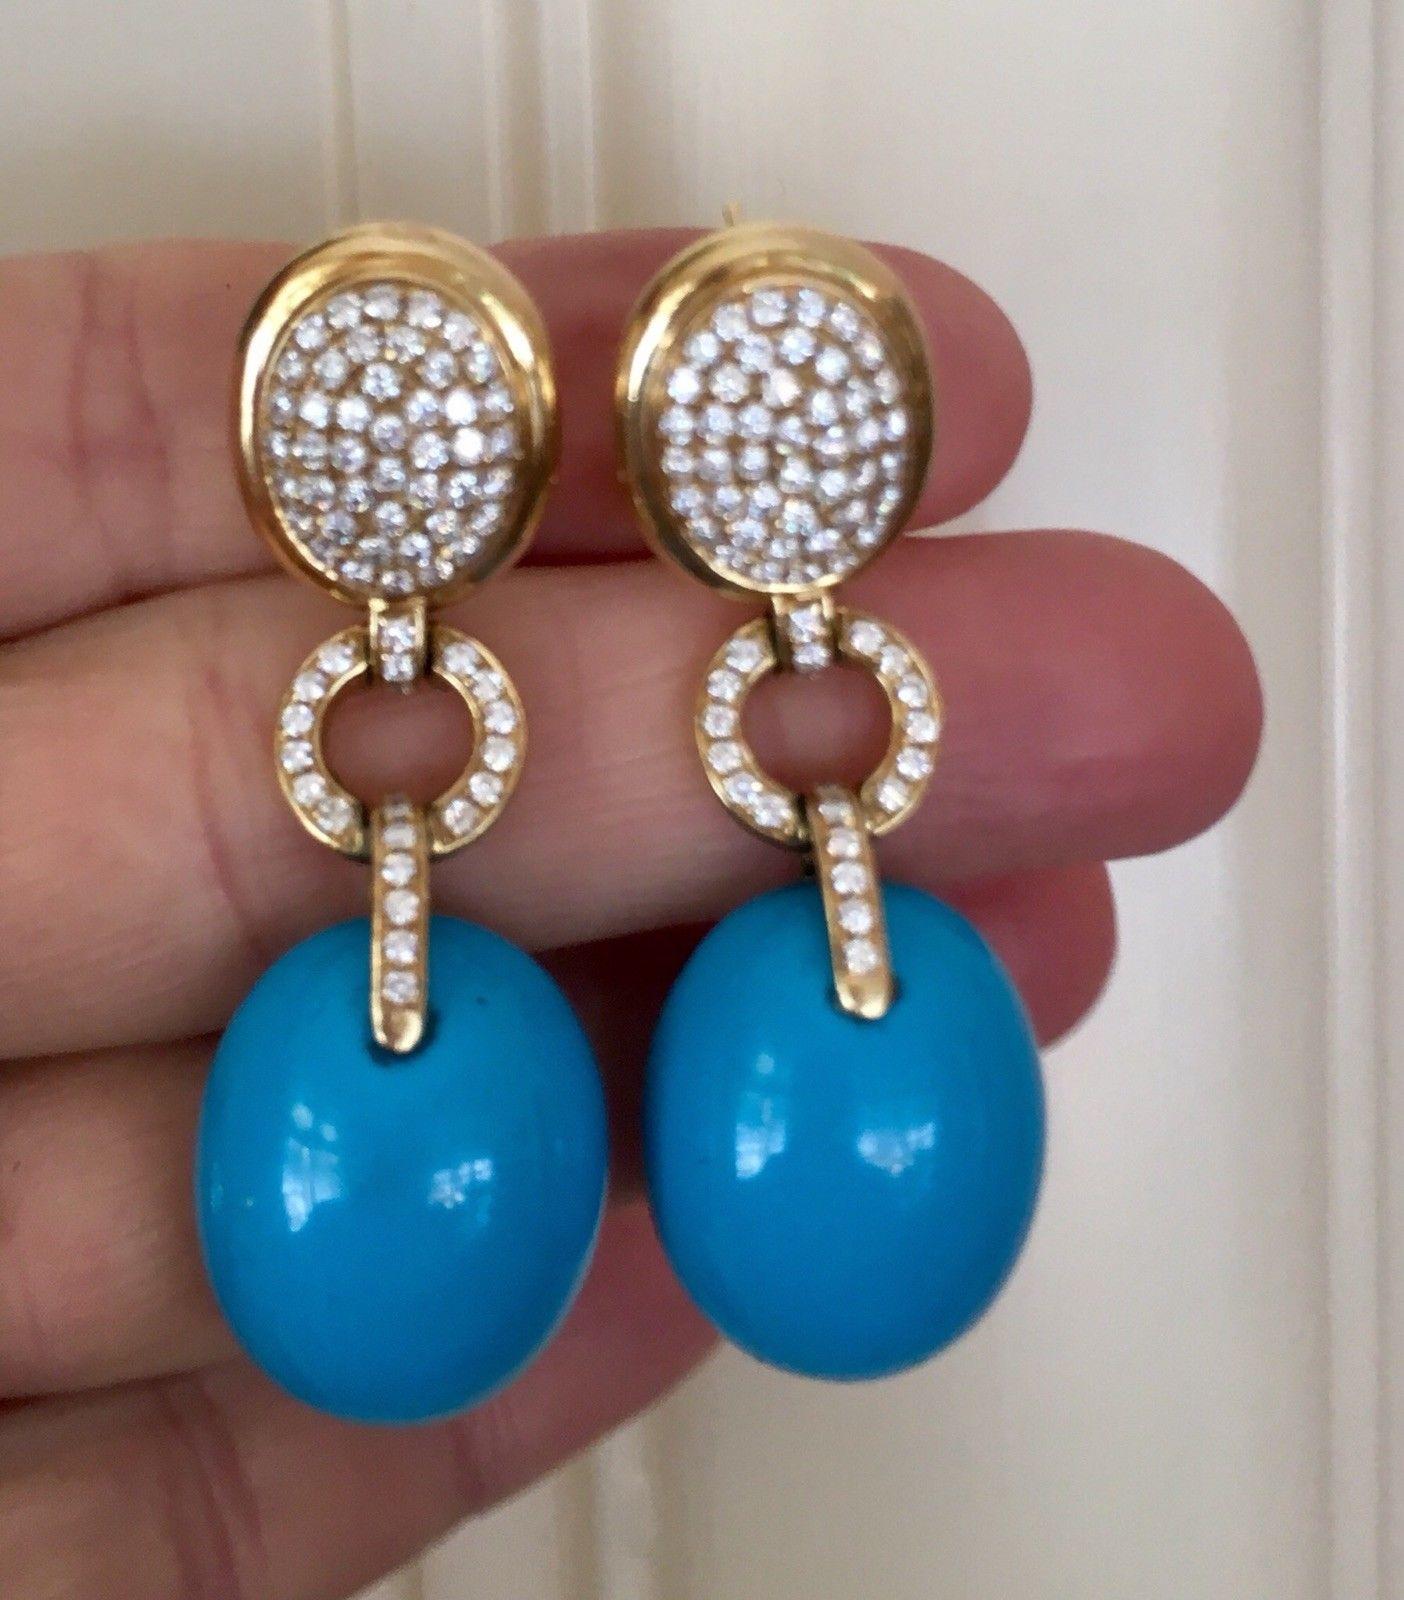 These stunning designer earrings are set in 18K yellow gold  featuring beautiful rich blue oval turquoise cabochons and 1.98 carats of round brilliant diamonds with omega back closures.

The total measurement of the earrings is 2